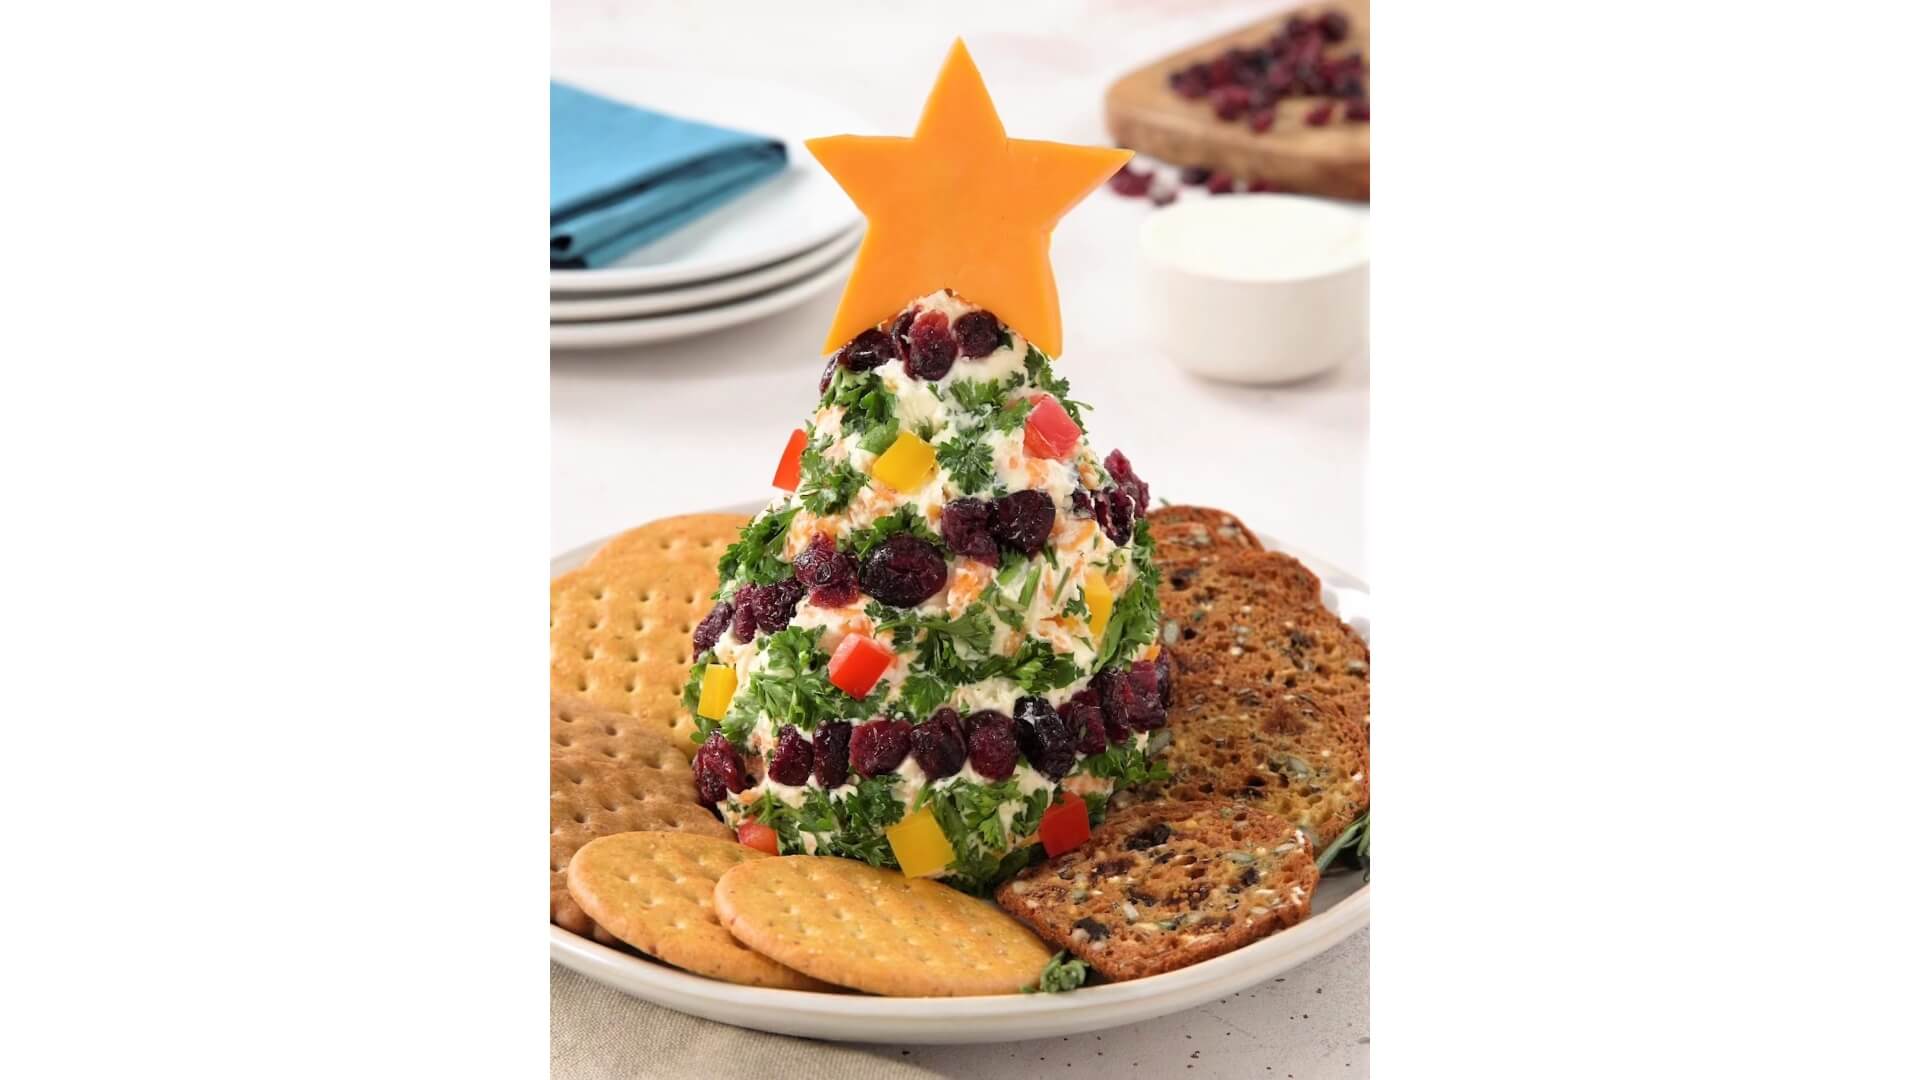 Plate holding a cheese ball shaped as a Christmas tree with garnishes displayed as ornaments. Topped with Cheddar cheese shaped as a star 